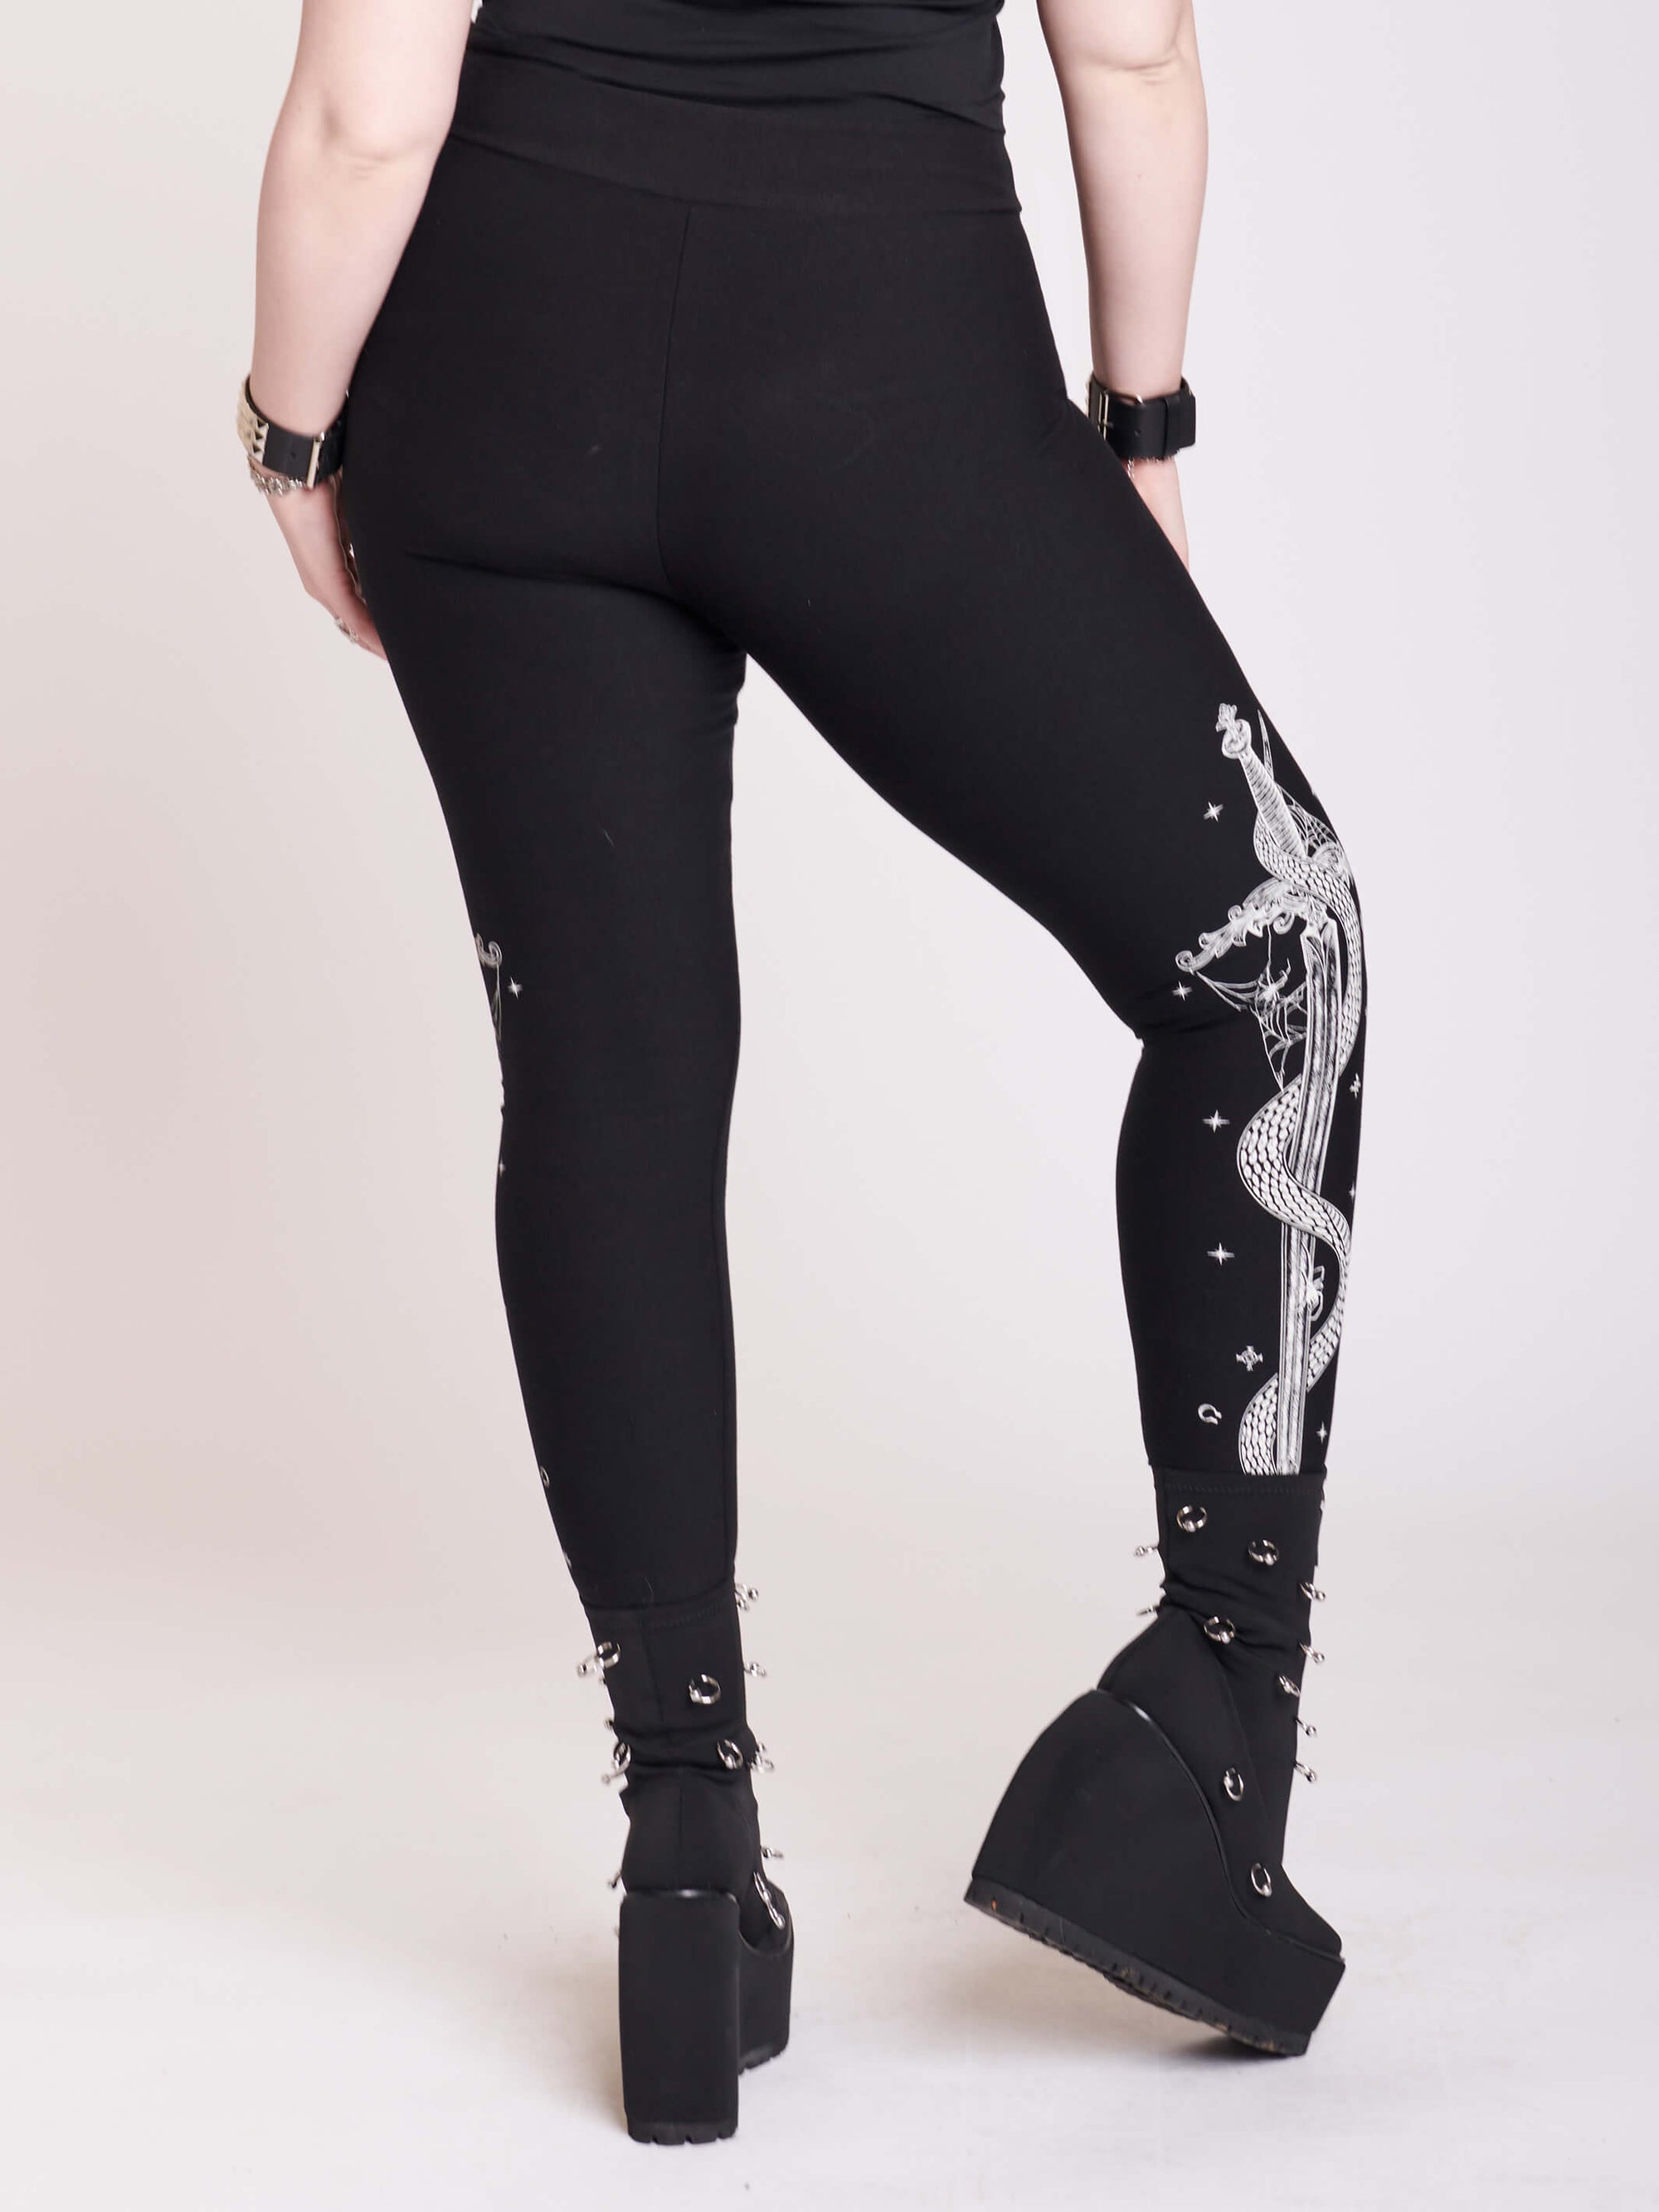 black legging with snake and dagger graphic on side